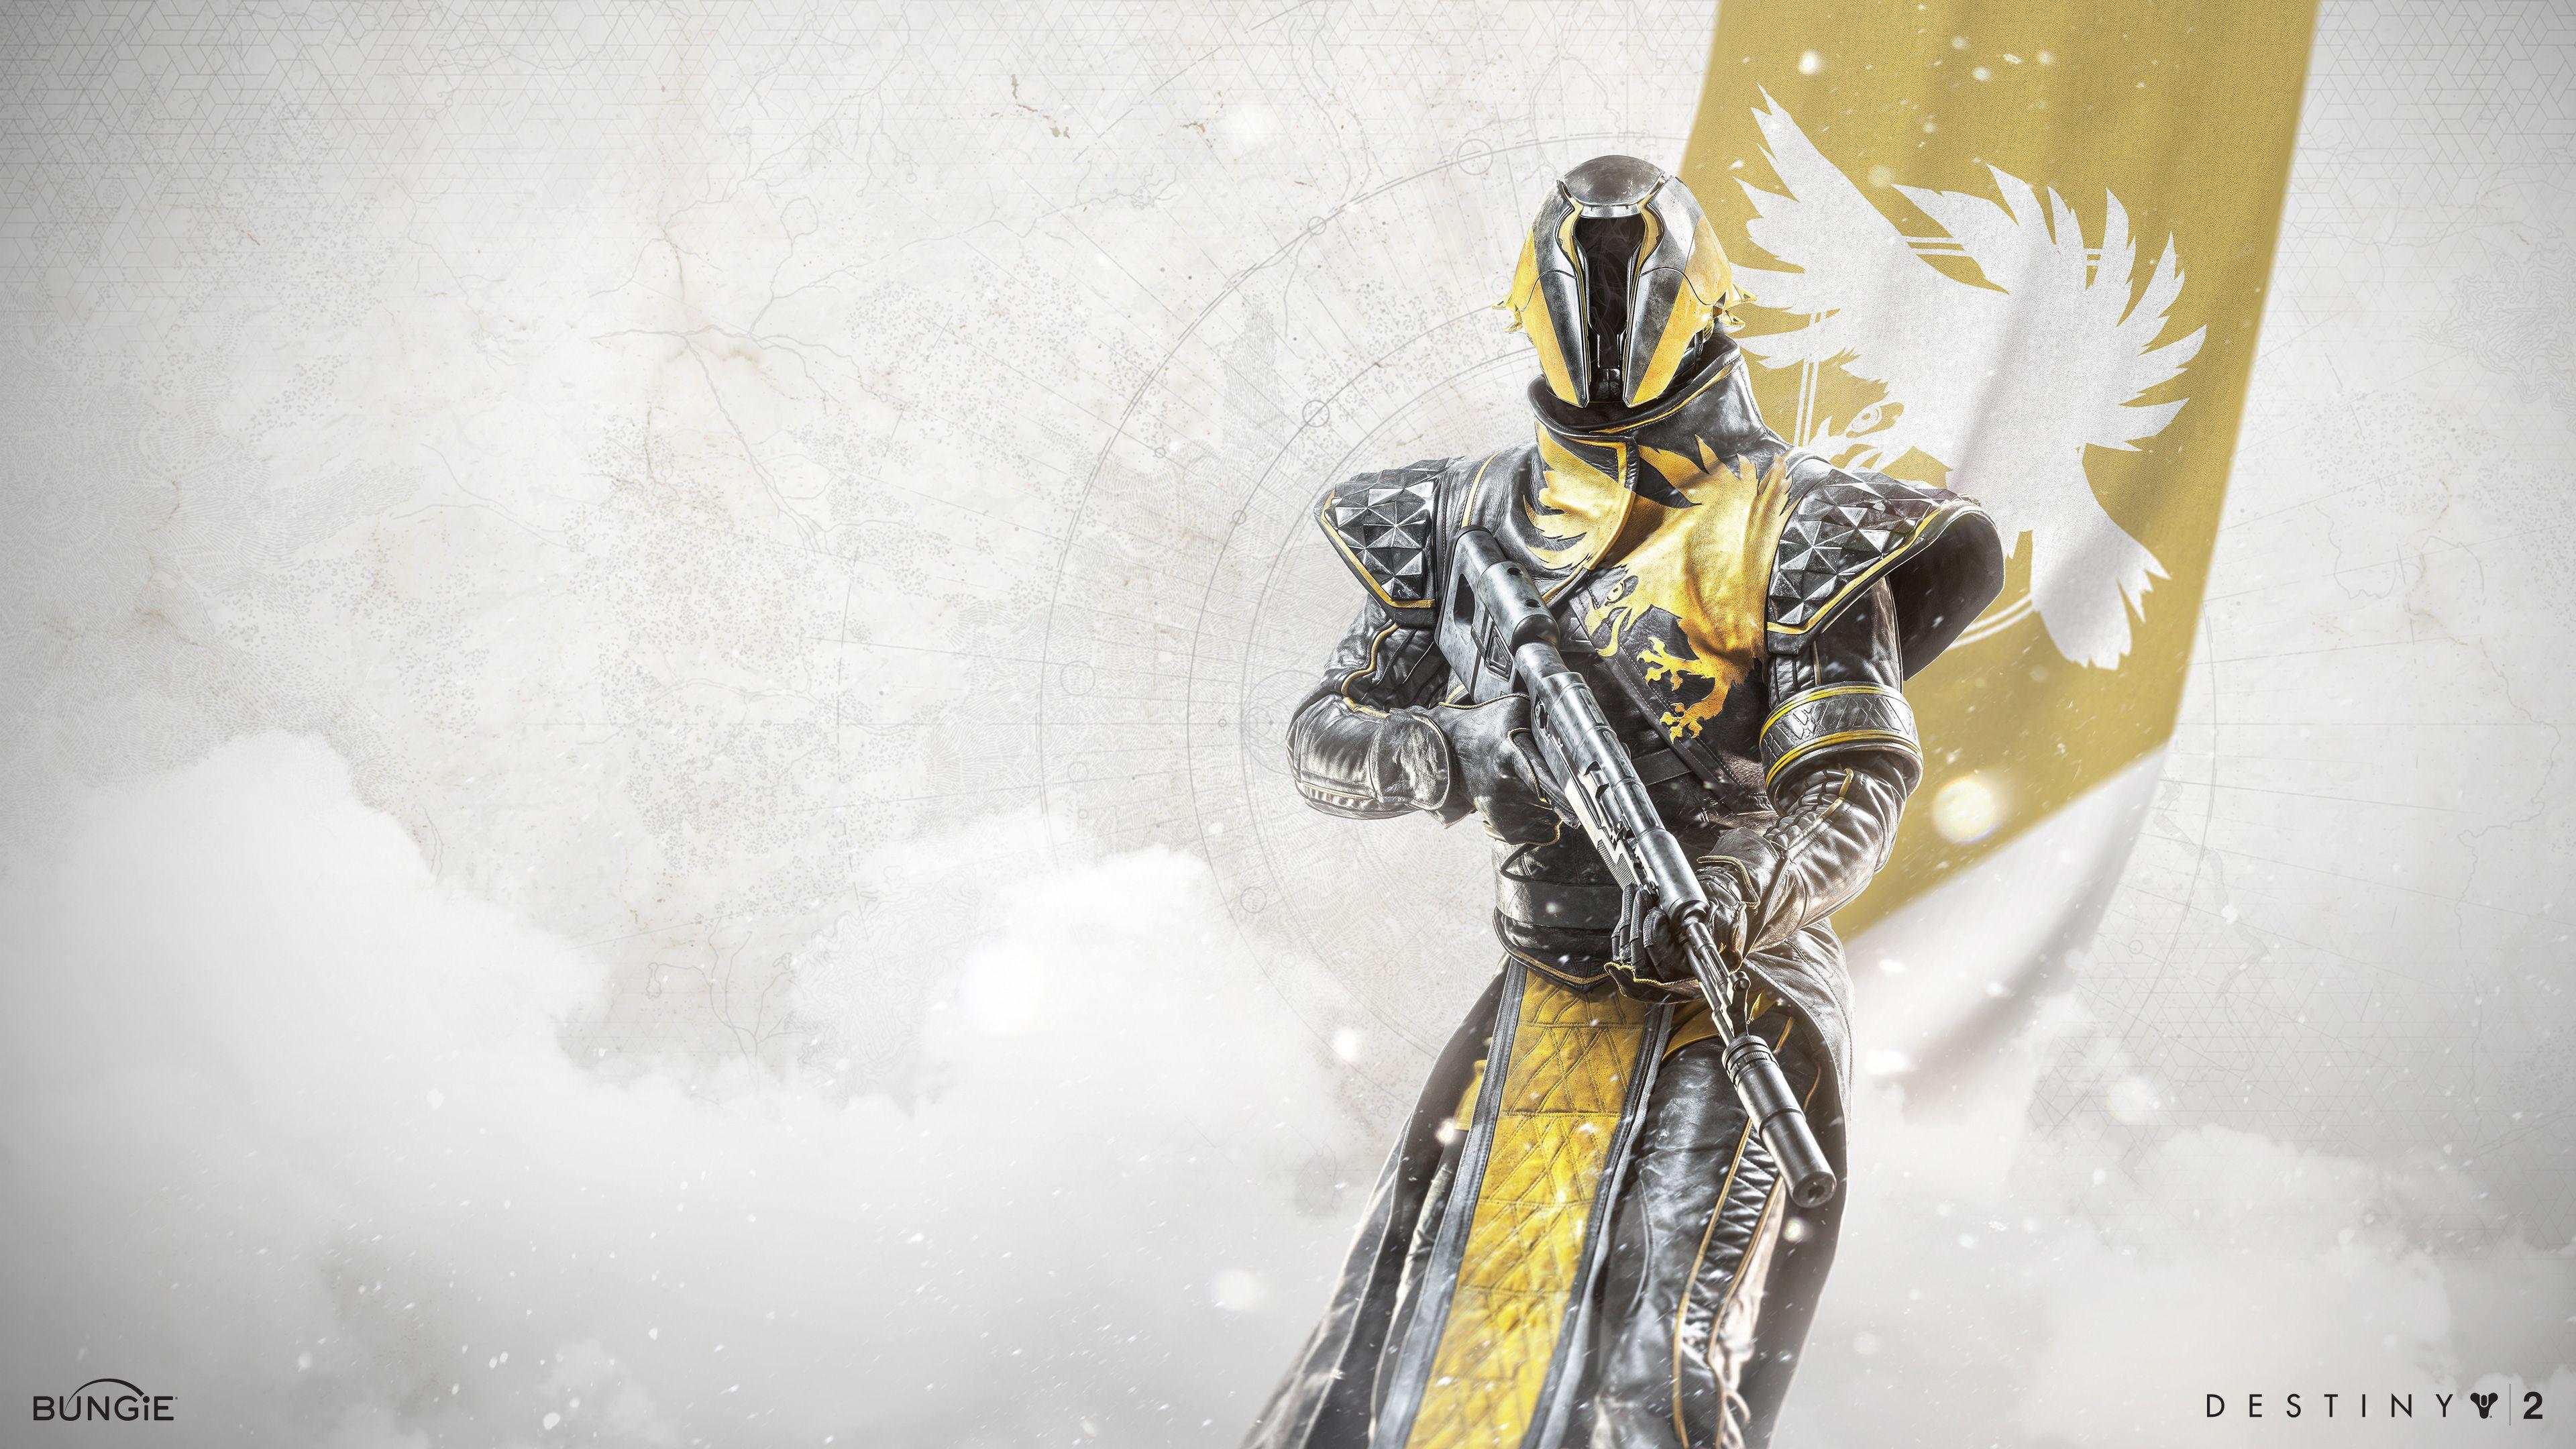 40 Destiny 2 HD  4k Wallpapers with Hunters Titans  More from Bungie   Geek Prime